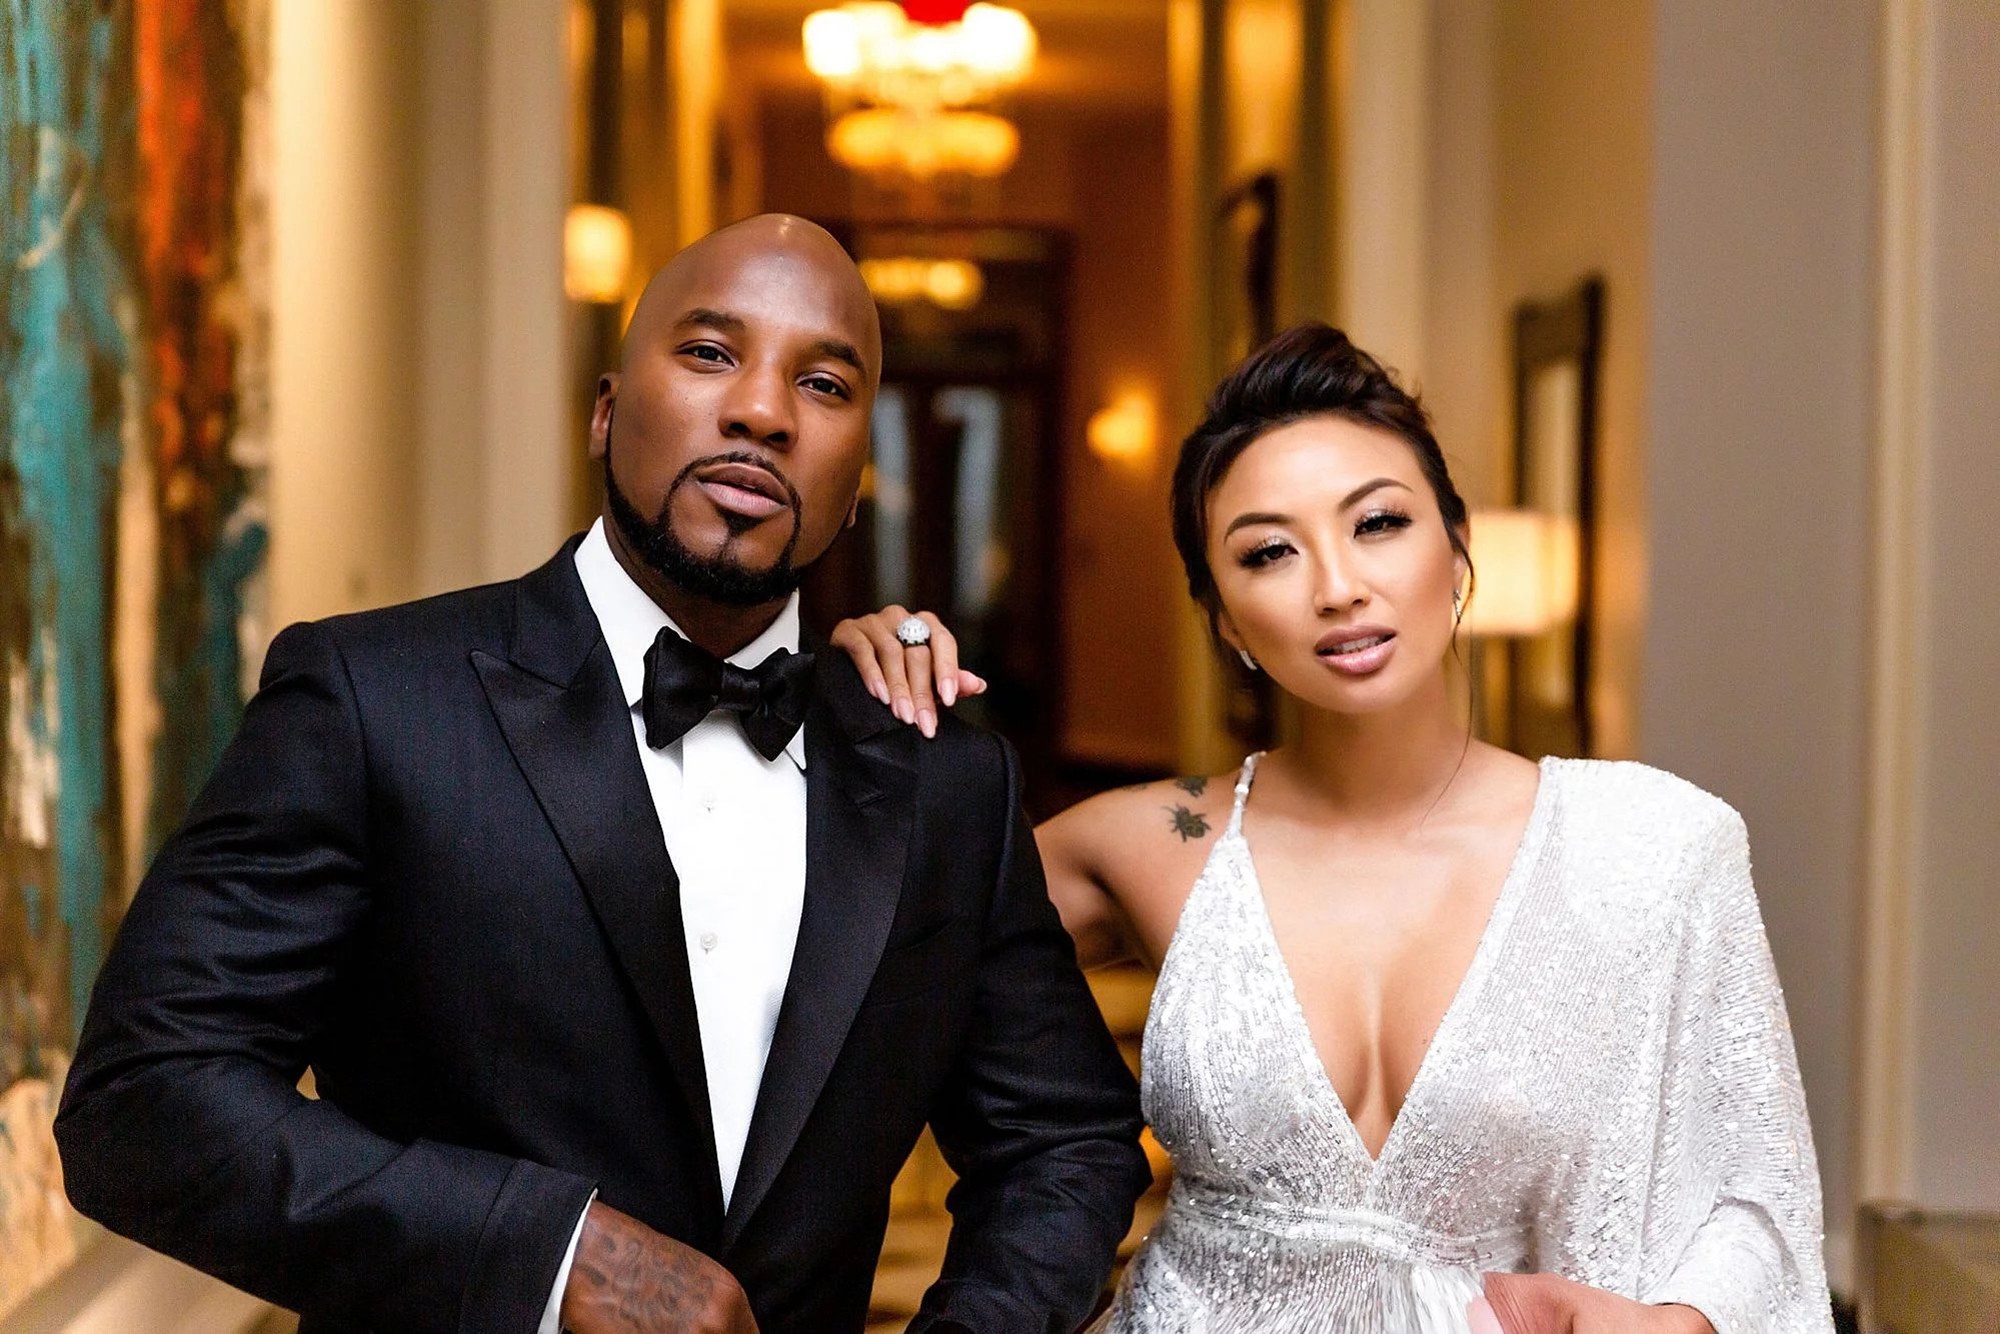 Jeannie Mai and Jeezy welcome their first child together